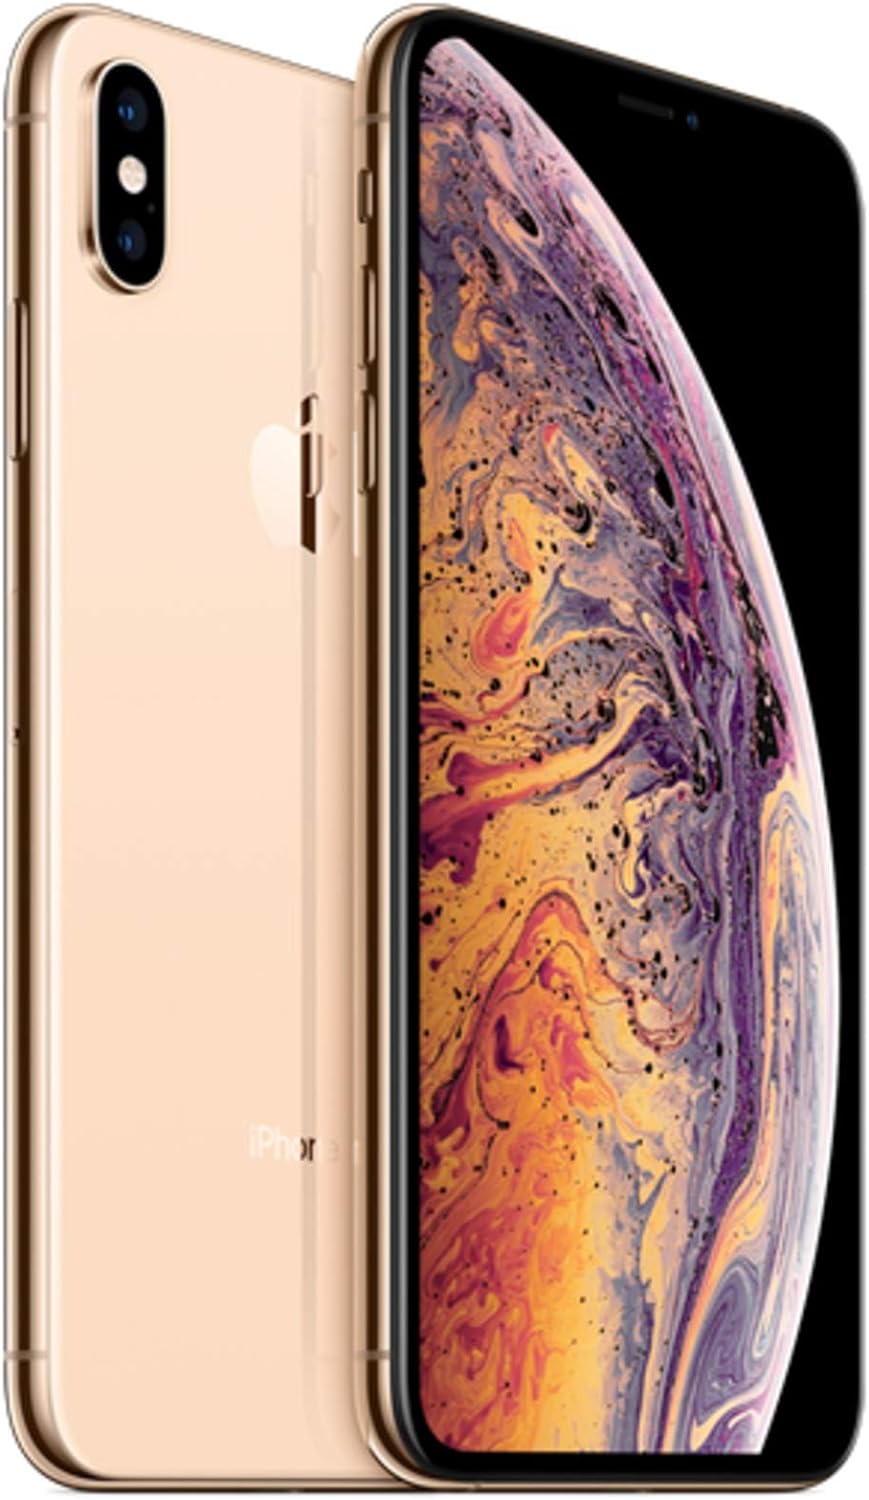 Apple iPhone XS Max, 256GB, Gold – CATOOSH TECHNOLOGY GROUP